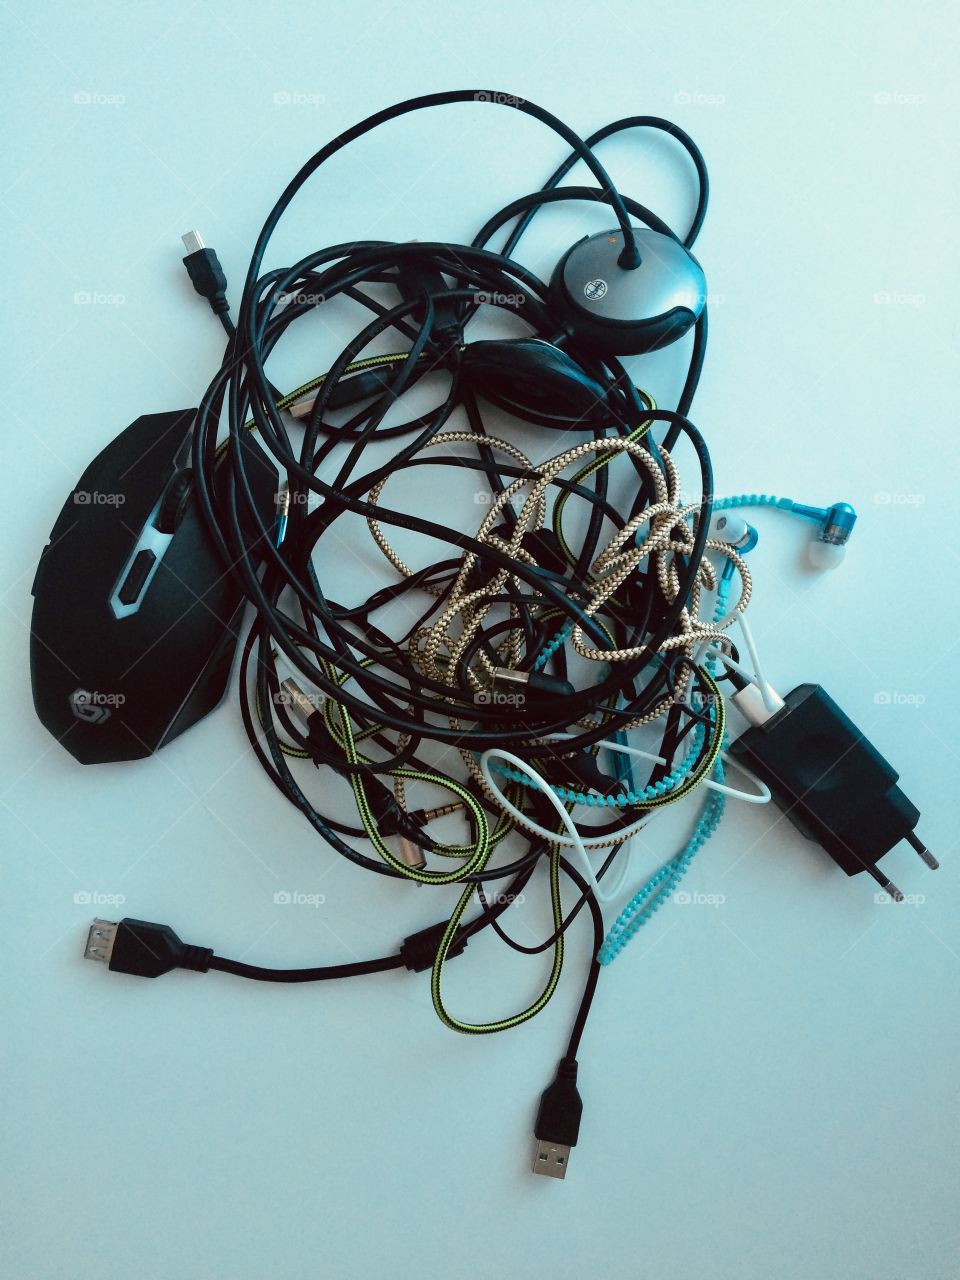 Tangled cables of computer mouse, usb and headphones 